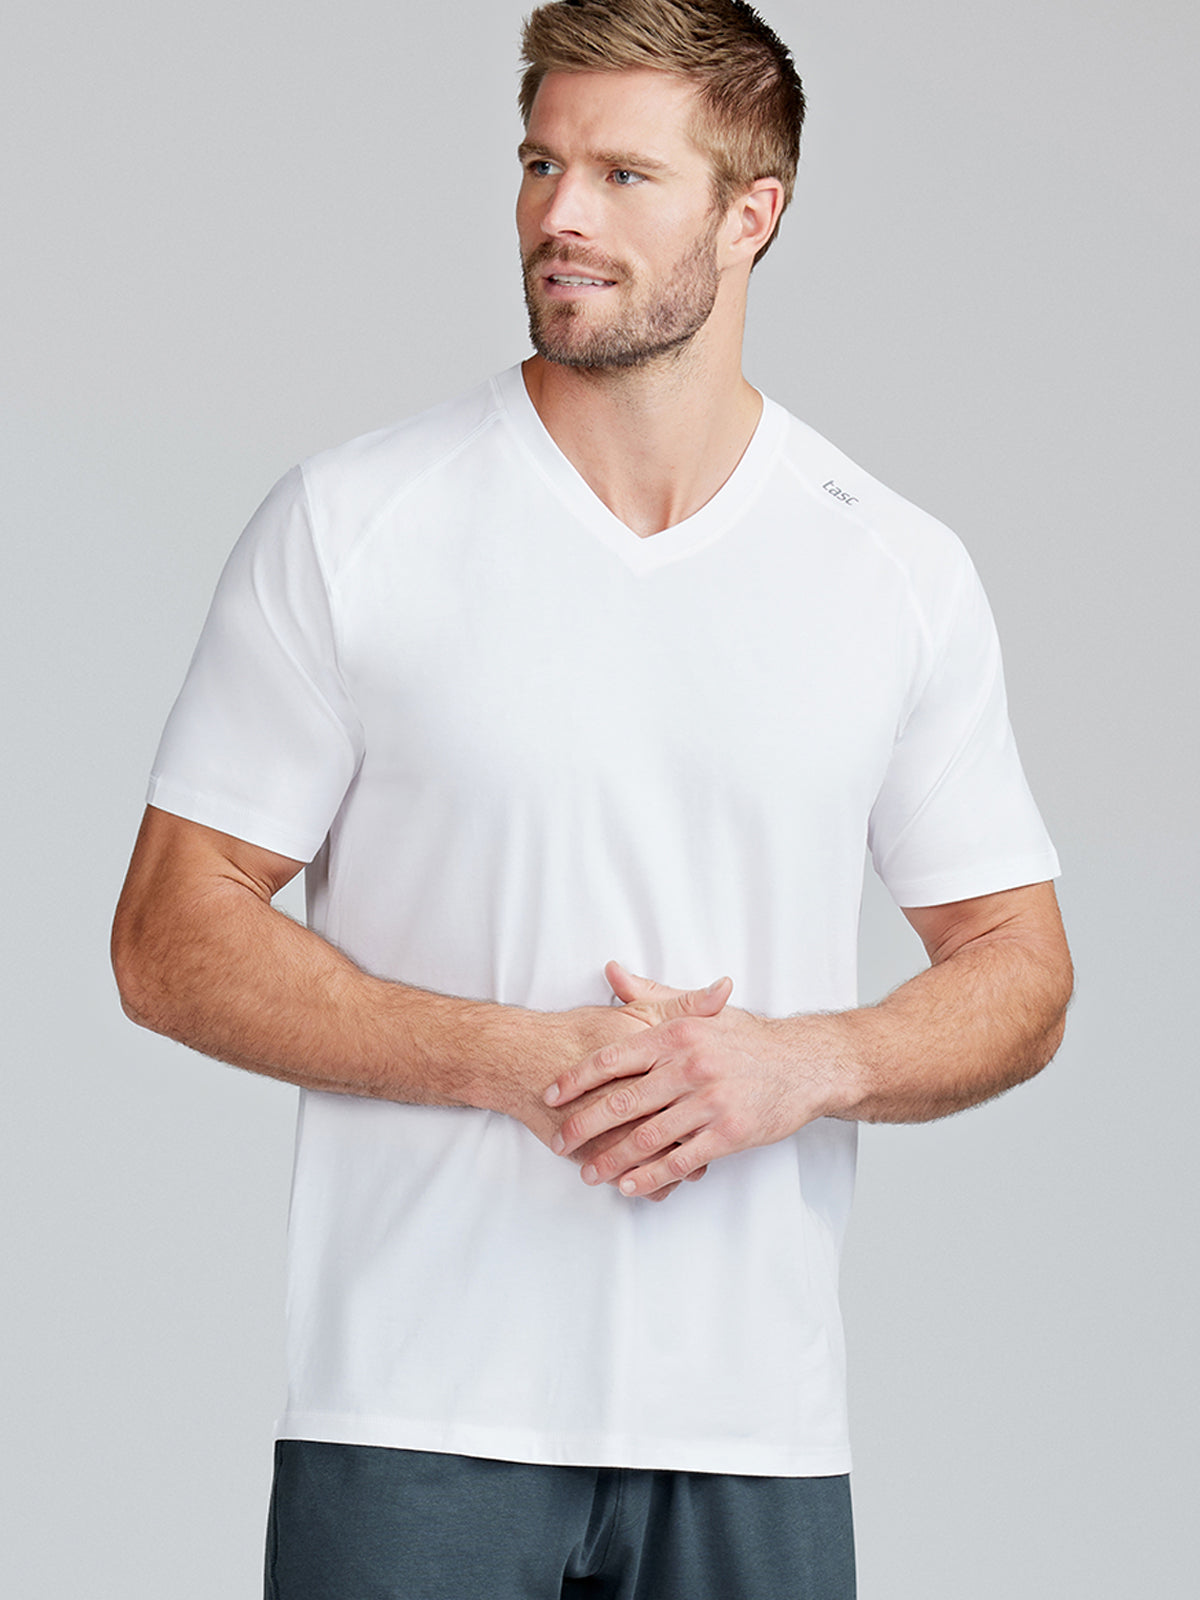 Textured V-Neck T-Shirt with Structured Jacket